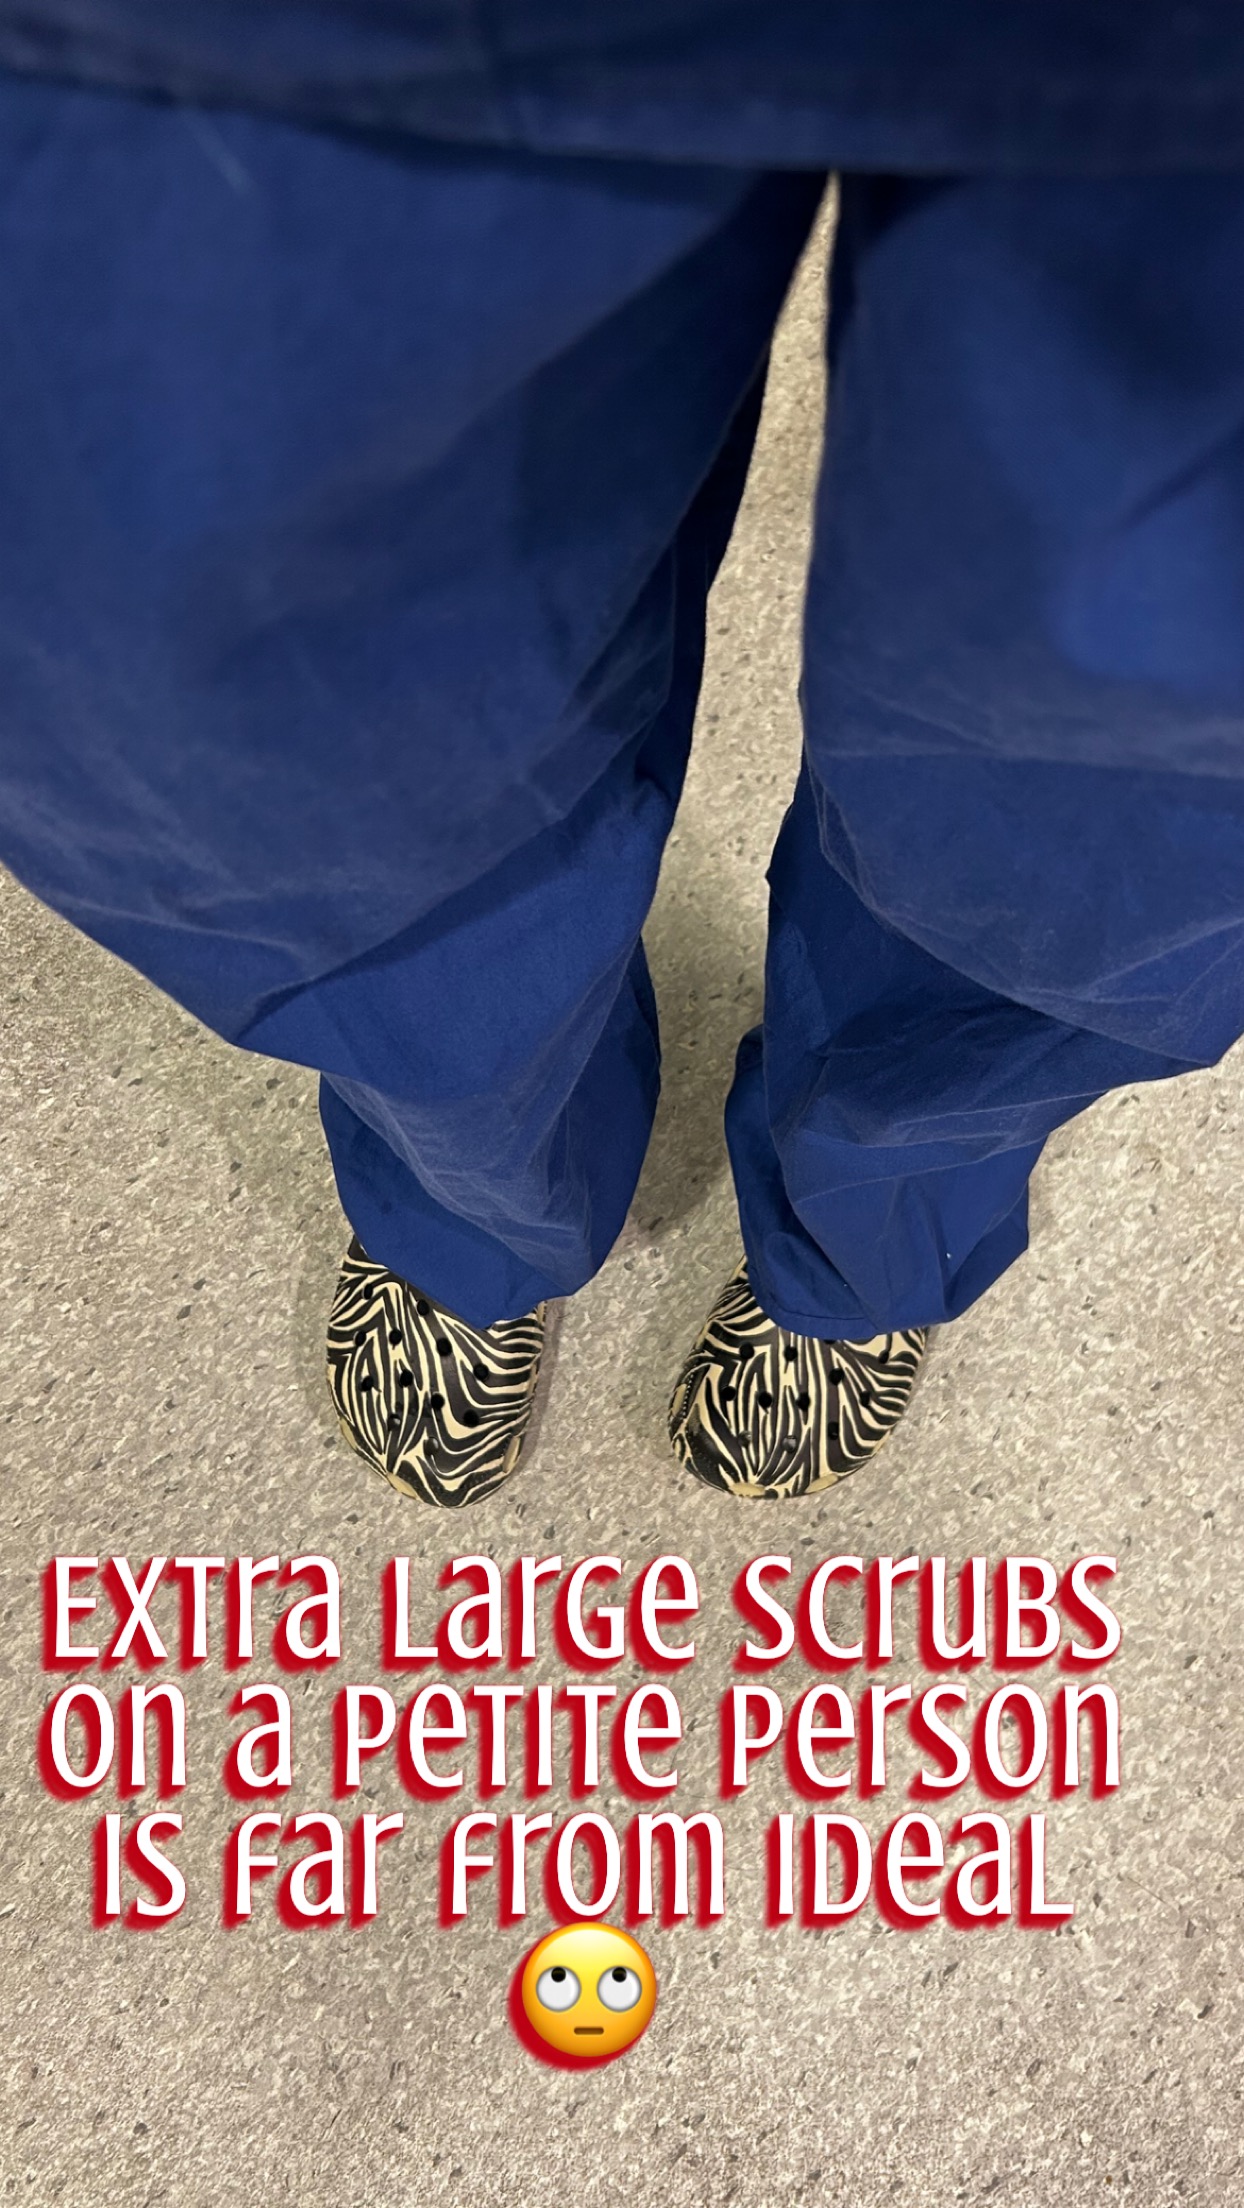 Extra large scrubs on a petite person far from ideal.